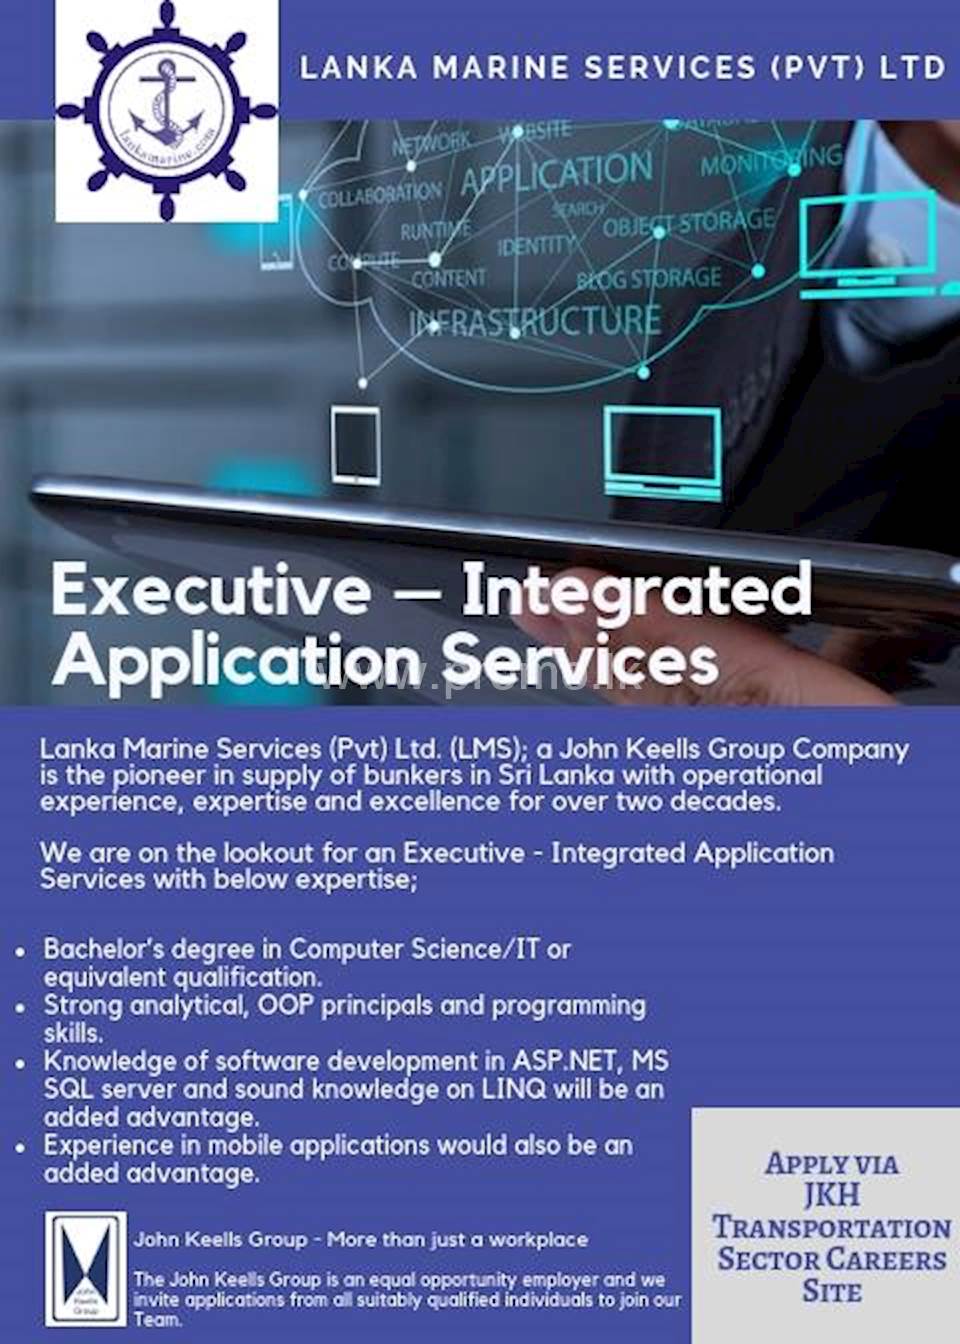 Executive - Integrated Application Services